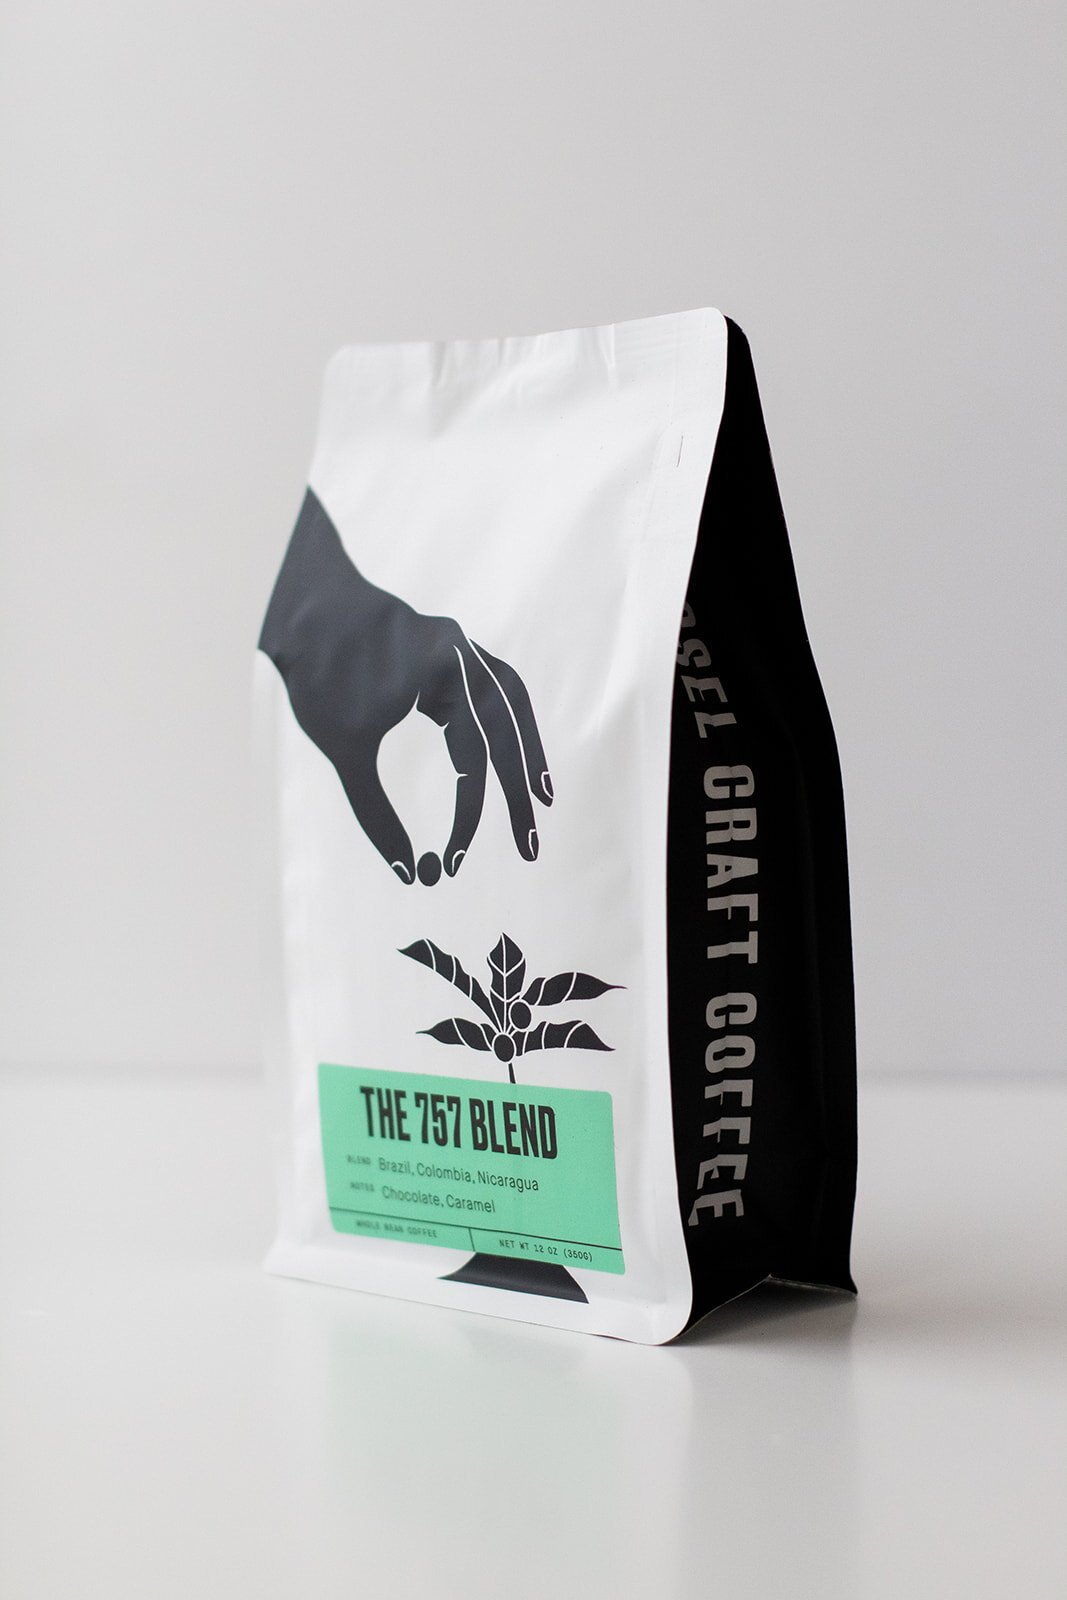 The 757 Blend -Vessel Craft Coffee